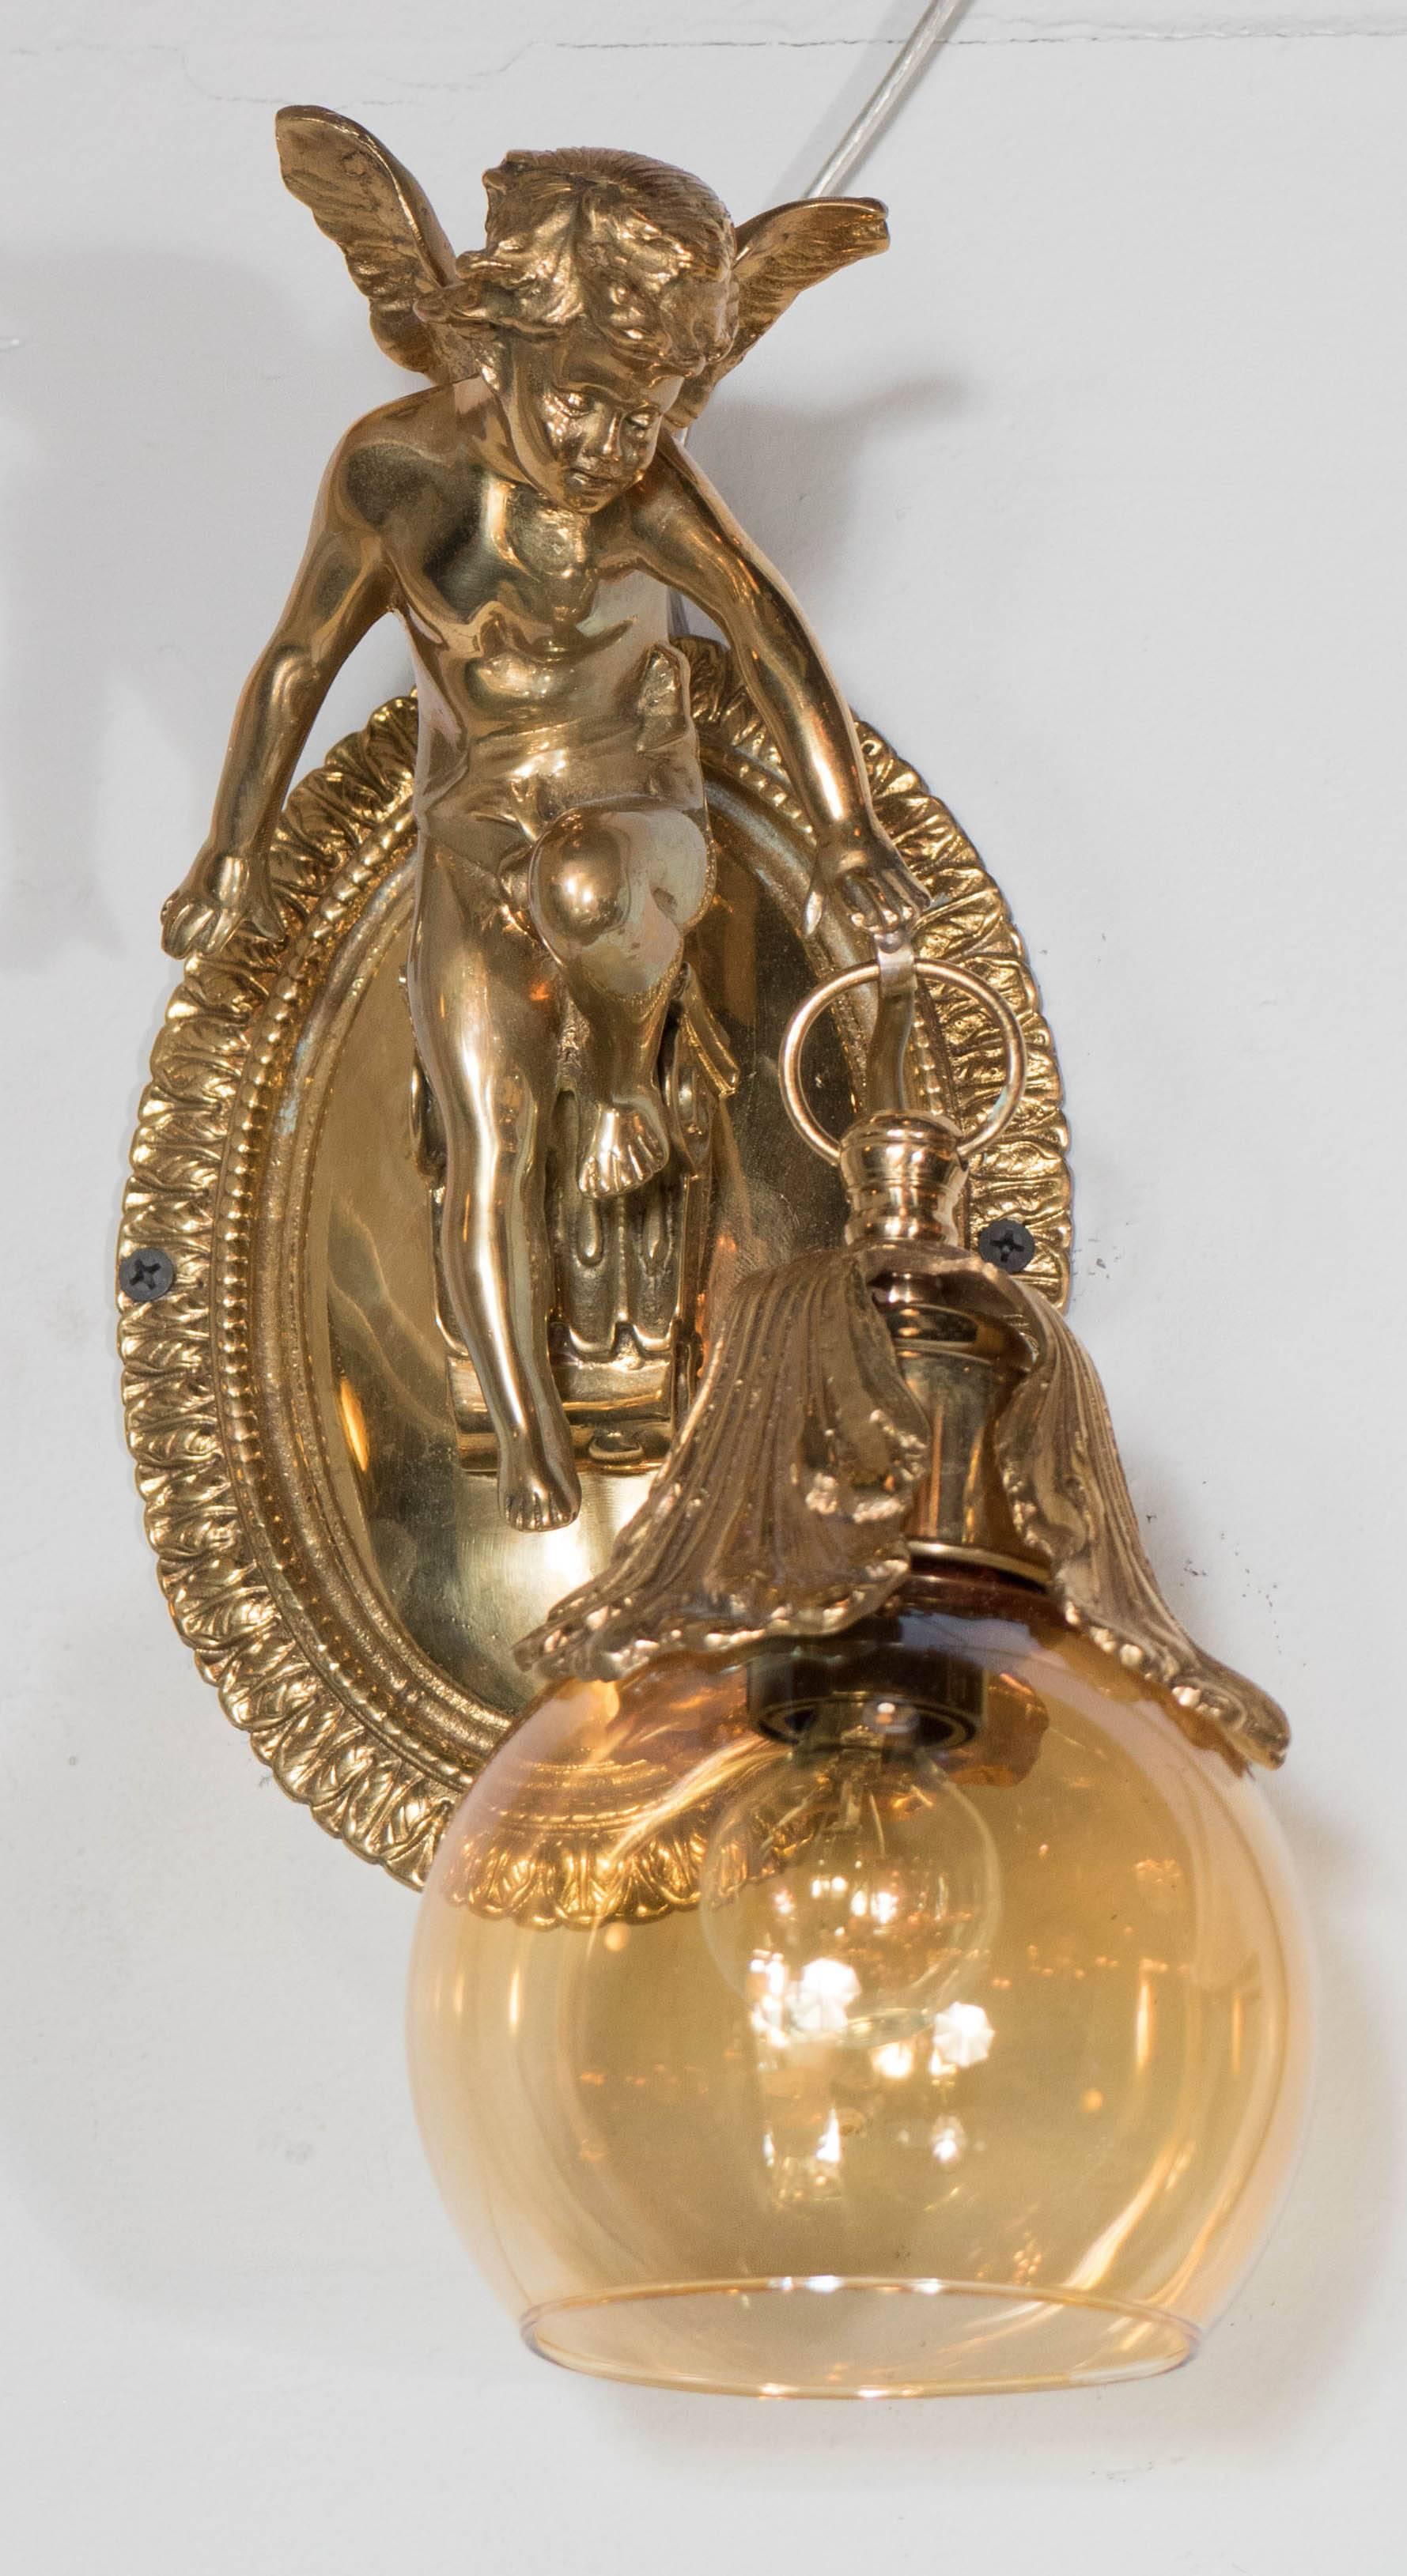 A Classic pair of brass sconces depicting winged cherubs holding a cognac hued lantern style globe draped with vine leaves. The cherub is mounted to an oval back plate bordered in a repeating laurel motif. The sconces have been newly rewired to